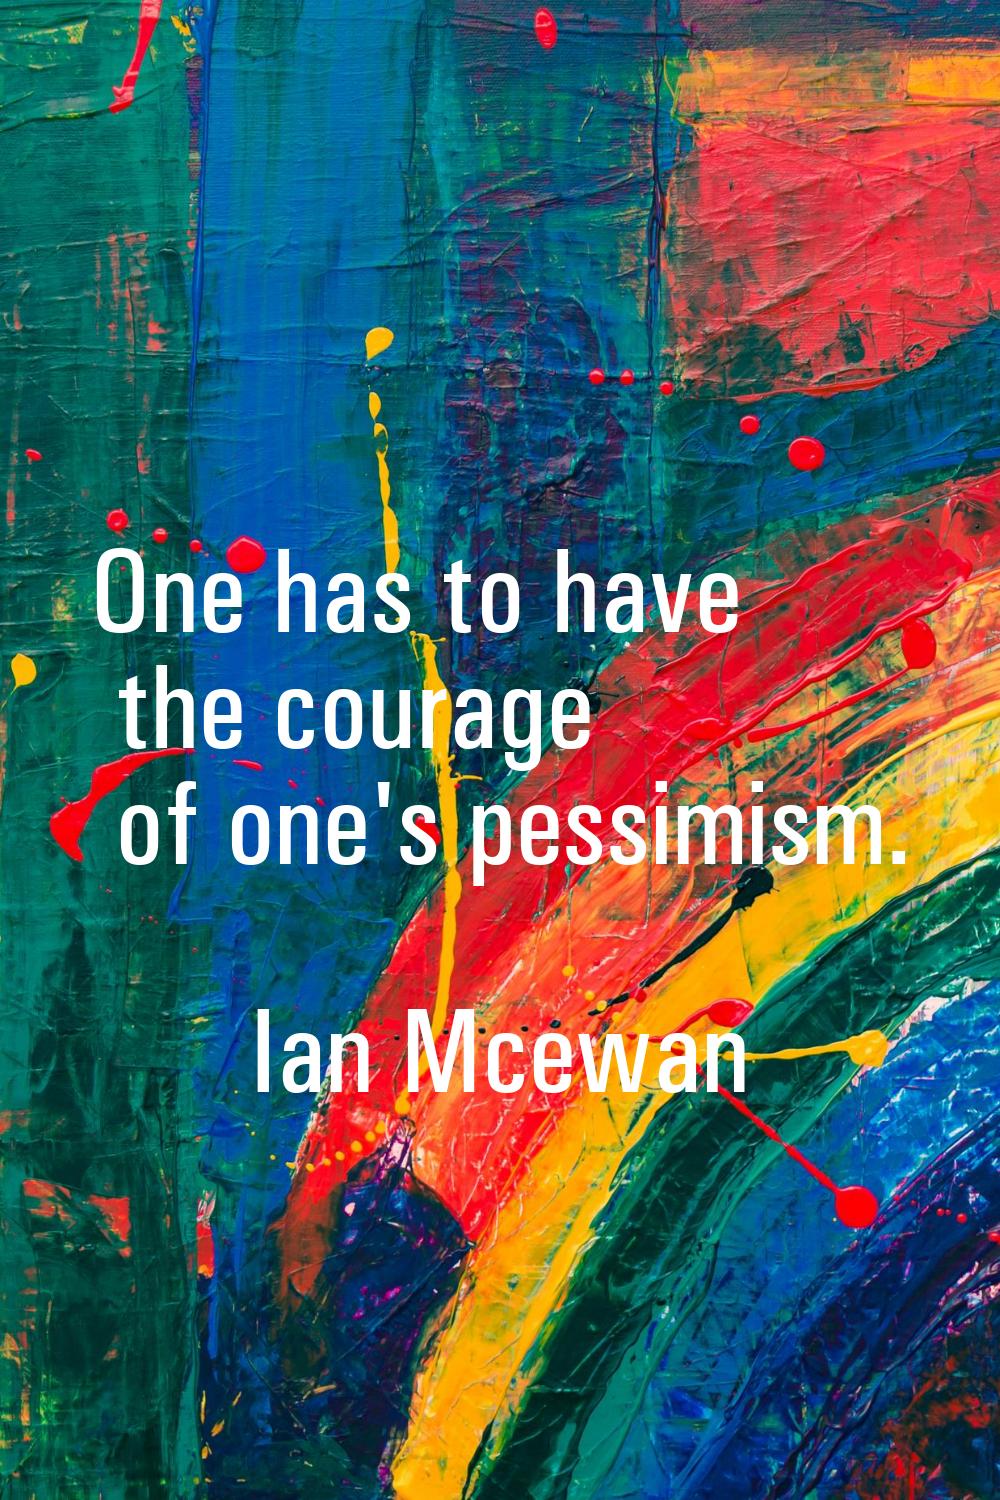 One has to have the courage of one's pessimism.